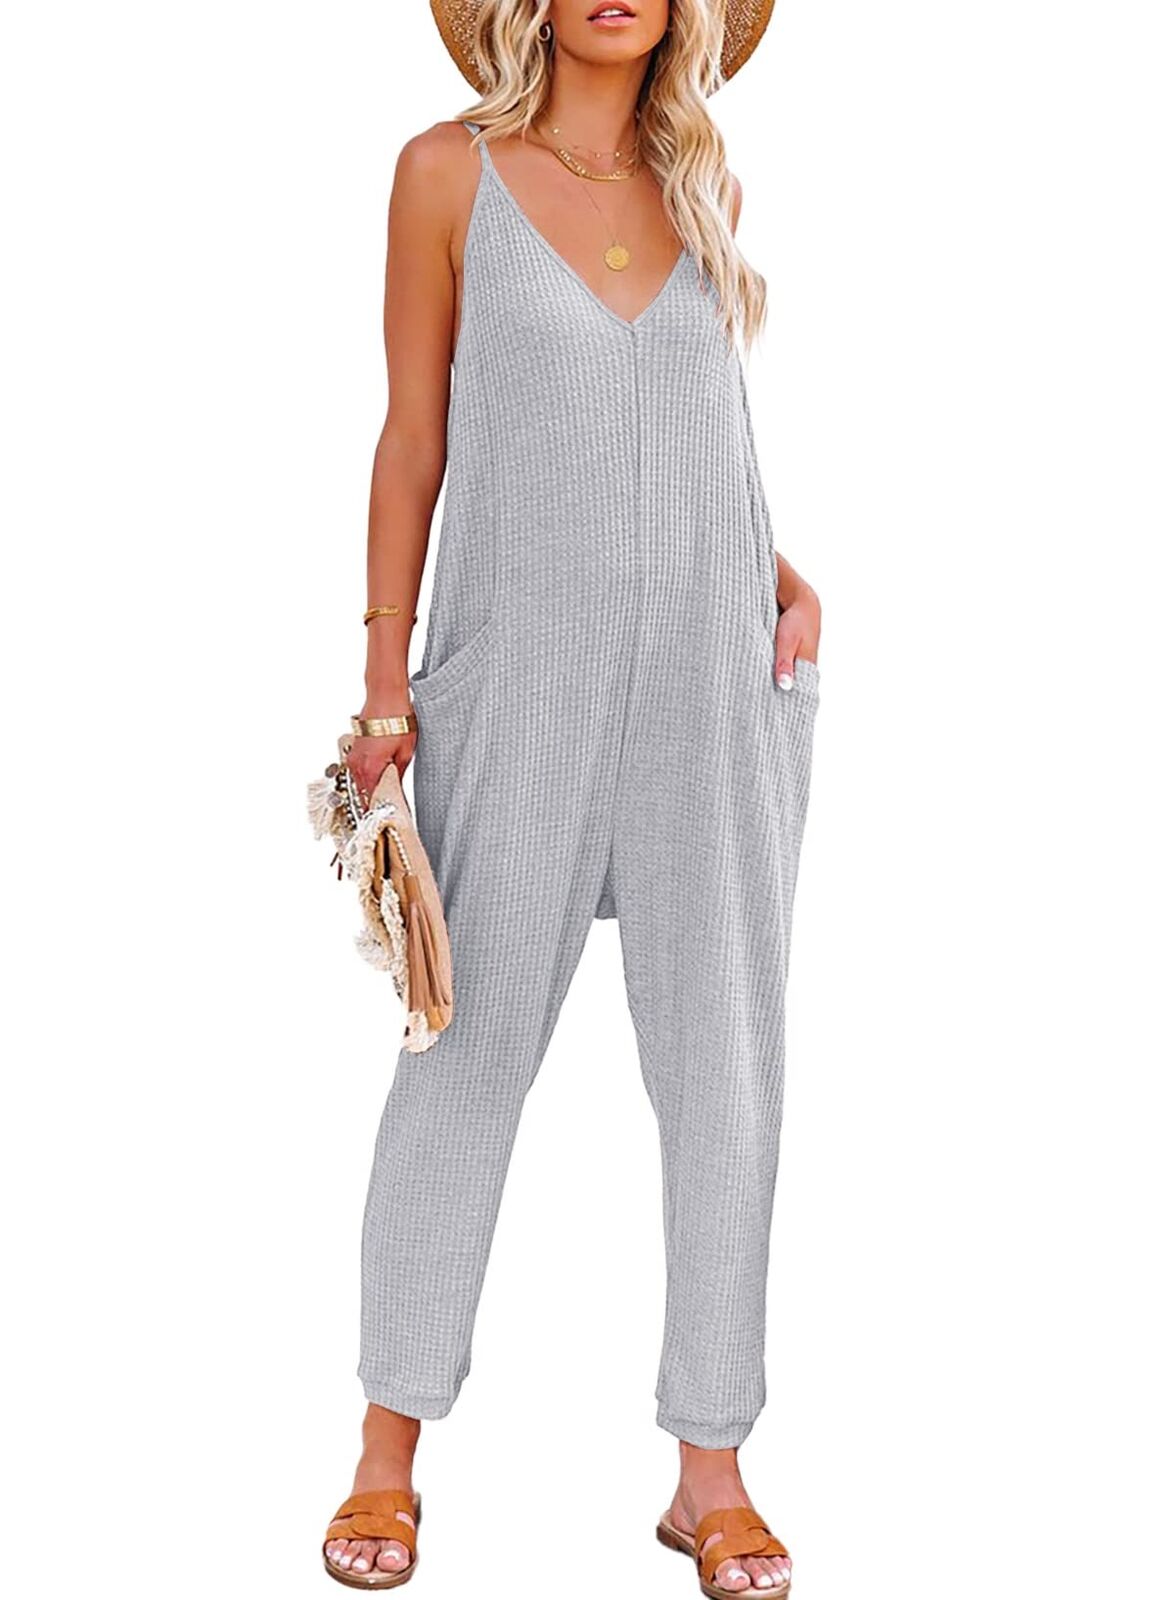 Huge AlvaQ Light Gray Jumpsuits Casual Long Pants Summer Rompers Petite Solid Colo… on eBay